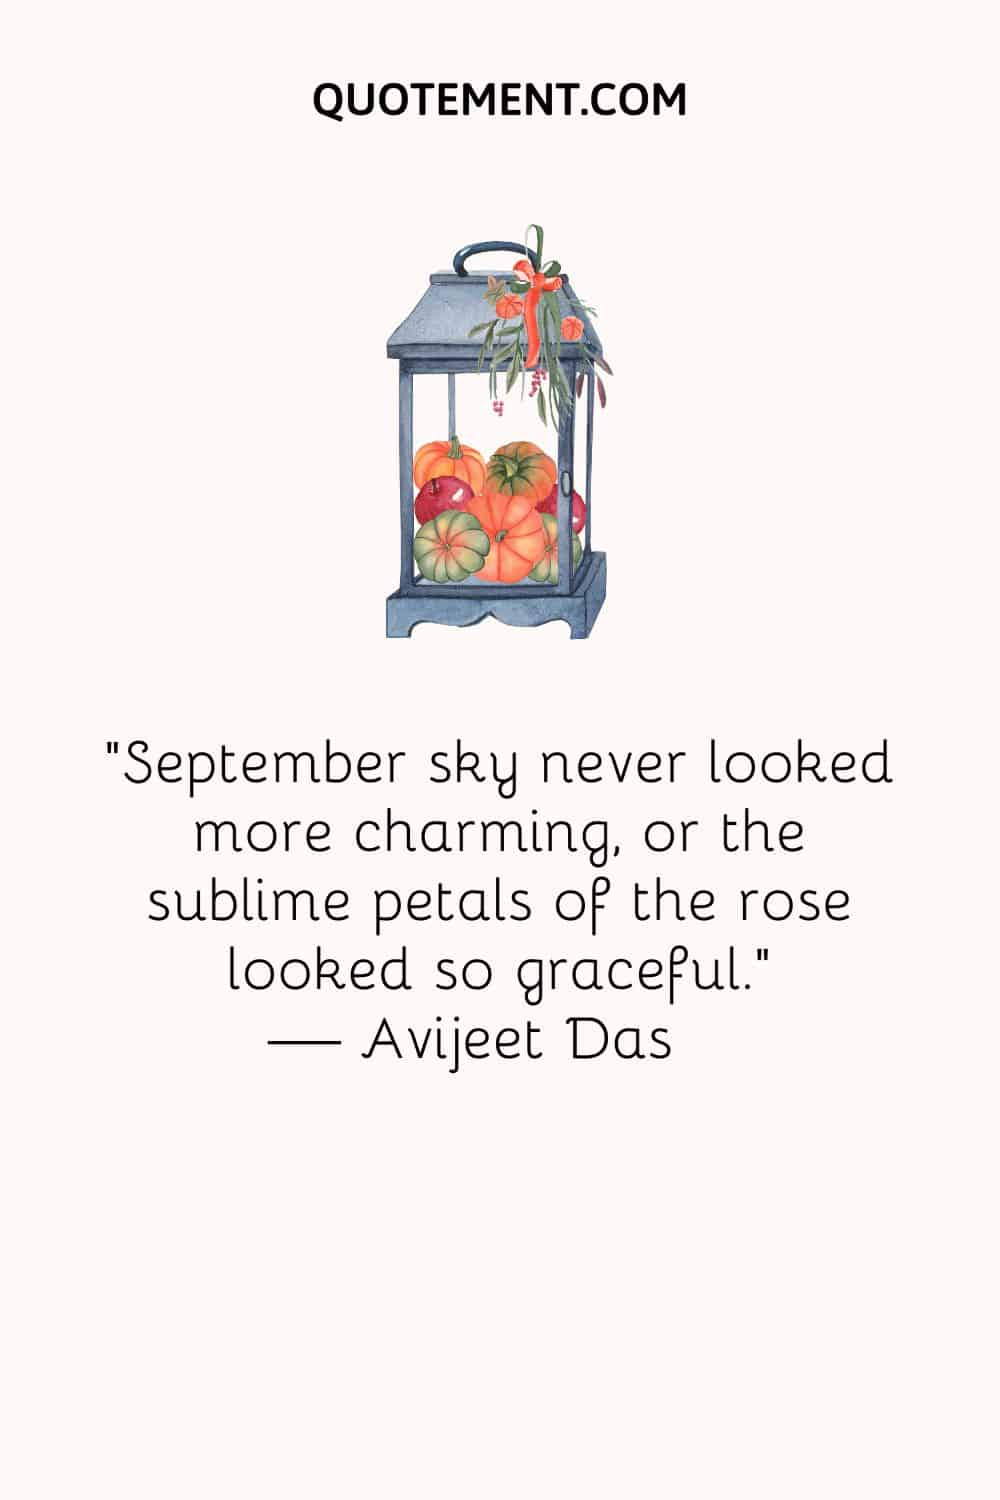 “September sky never looked more charming, or the sublime petals of the rose looked so graceful.” ― Avijeet Das